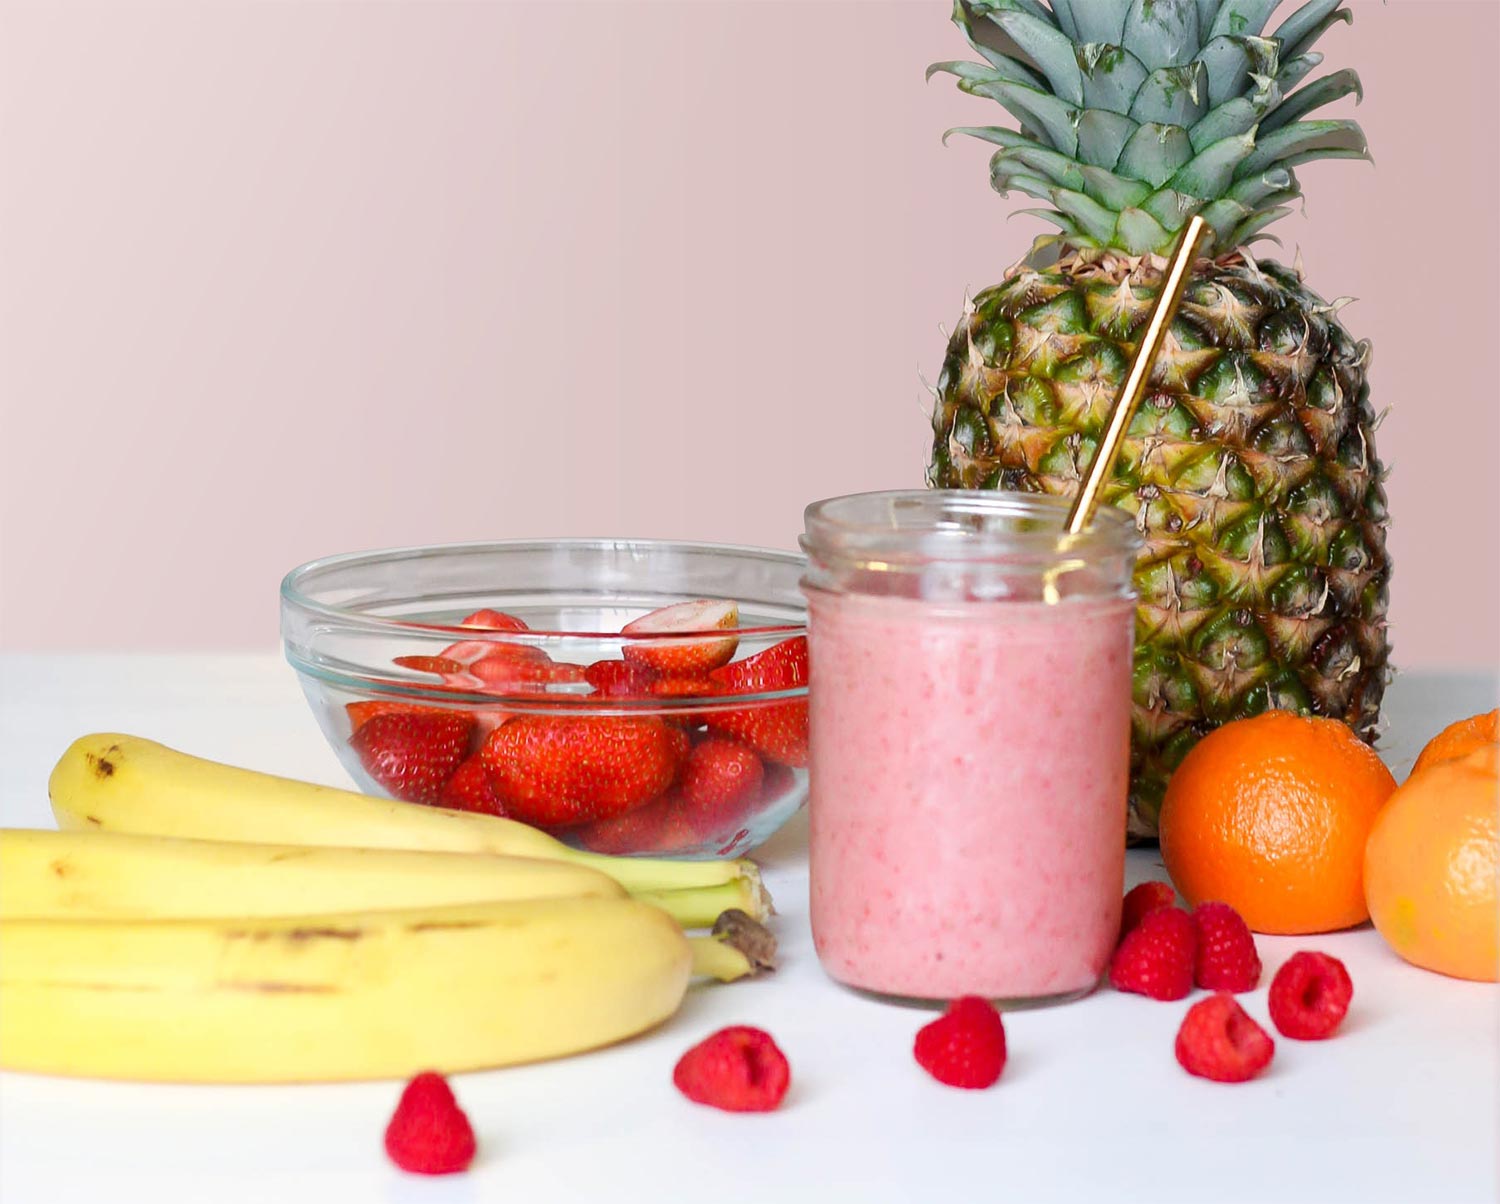 Smoothie N Go Let's You Enjoy A Smoothie In 30 Seconds Without A Blender -  SWAGGER Magazine